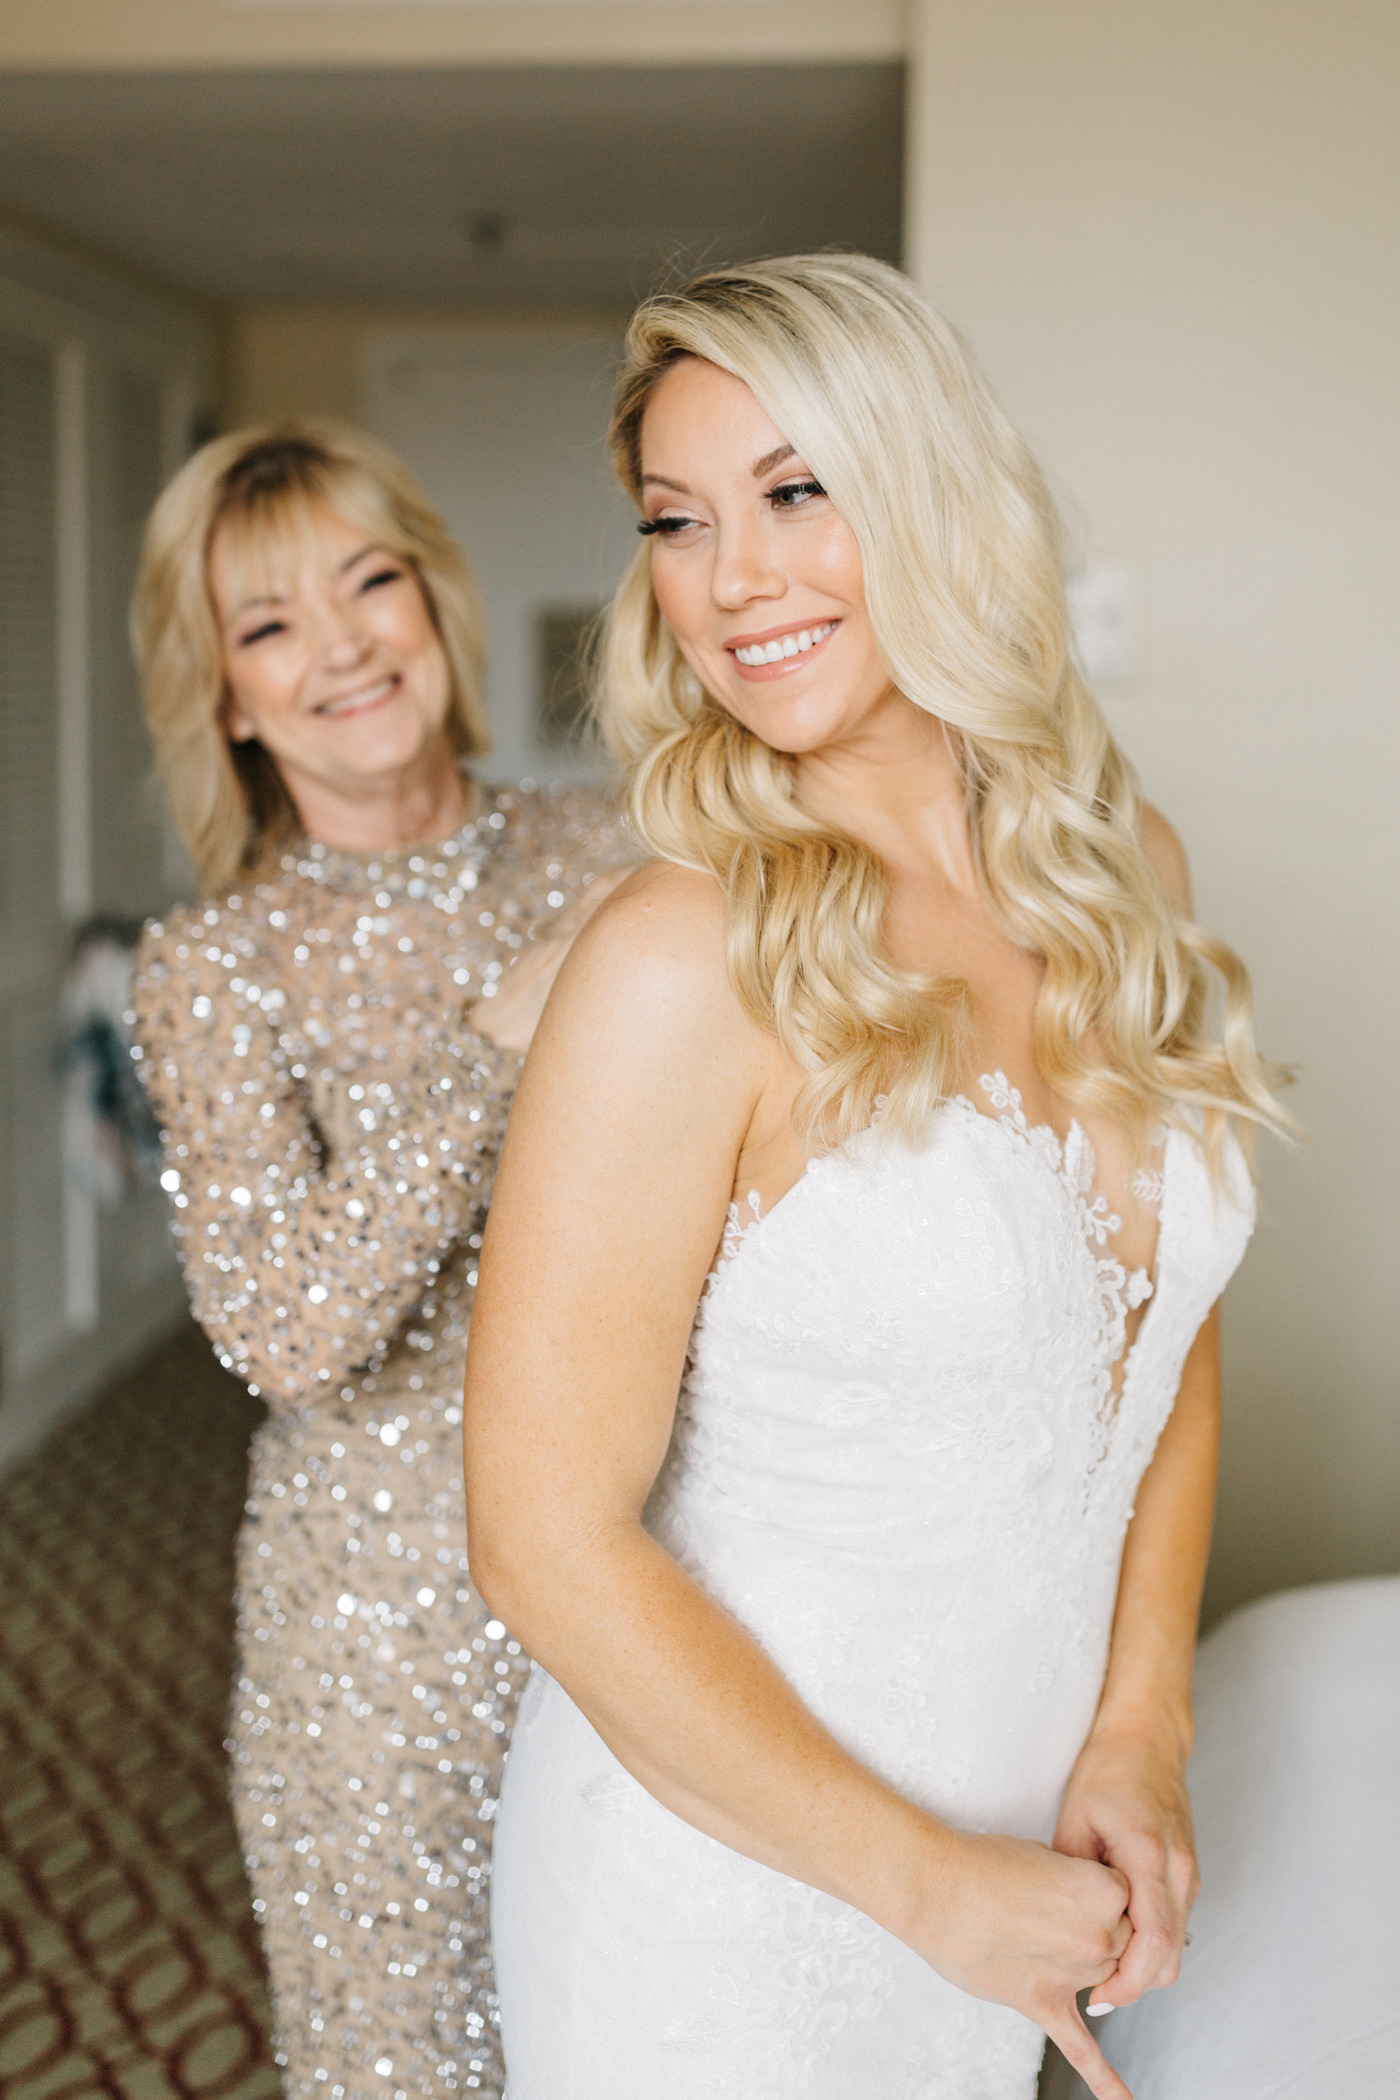 Classic Tampa Bay Bride and Mother Getting Ready Photo Portrait, Ashley Stegbauer Morrison Wearing Boho Chic Inspired Ines Di Santo Wedding Dress, Lace Fit and Flare with Plunging Neckline | Luxury Florida Wedding and Bridal Dress Shop Isabel O’Neil Bridal Collection